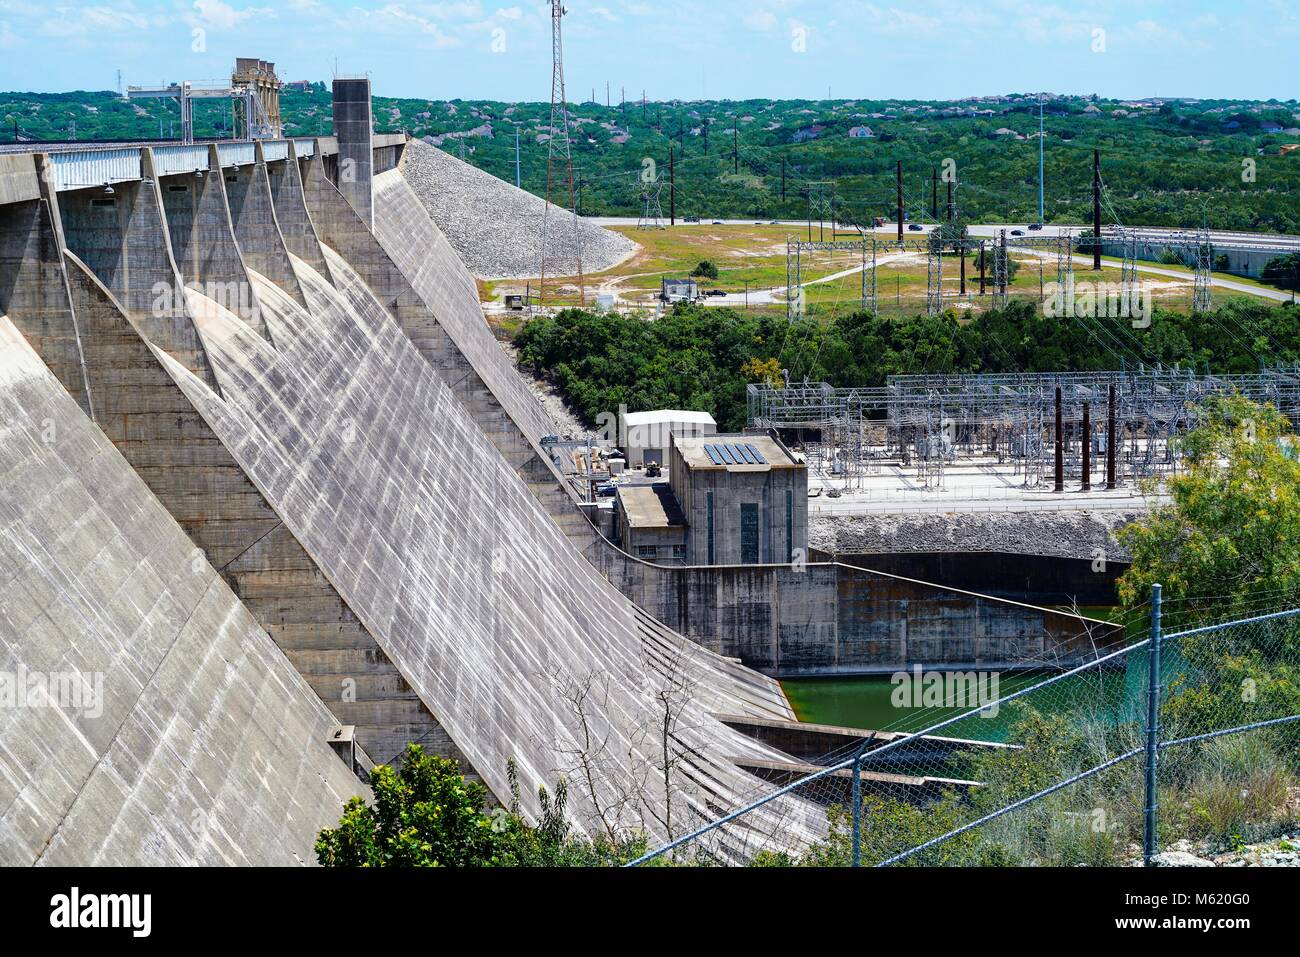 The Mansfield dam on Lake Travis was built to help control flooding and generate hydroelectric power for the area near Austin Texas. Stock Photo